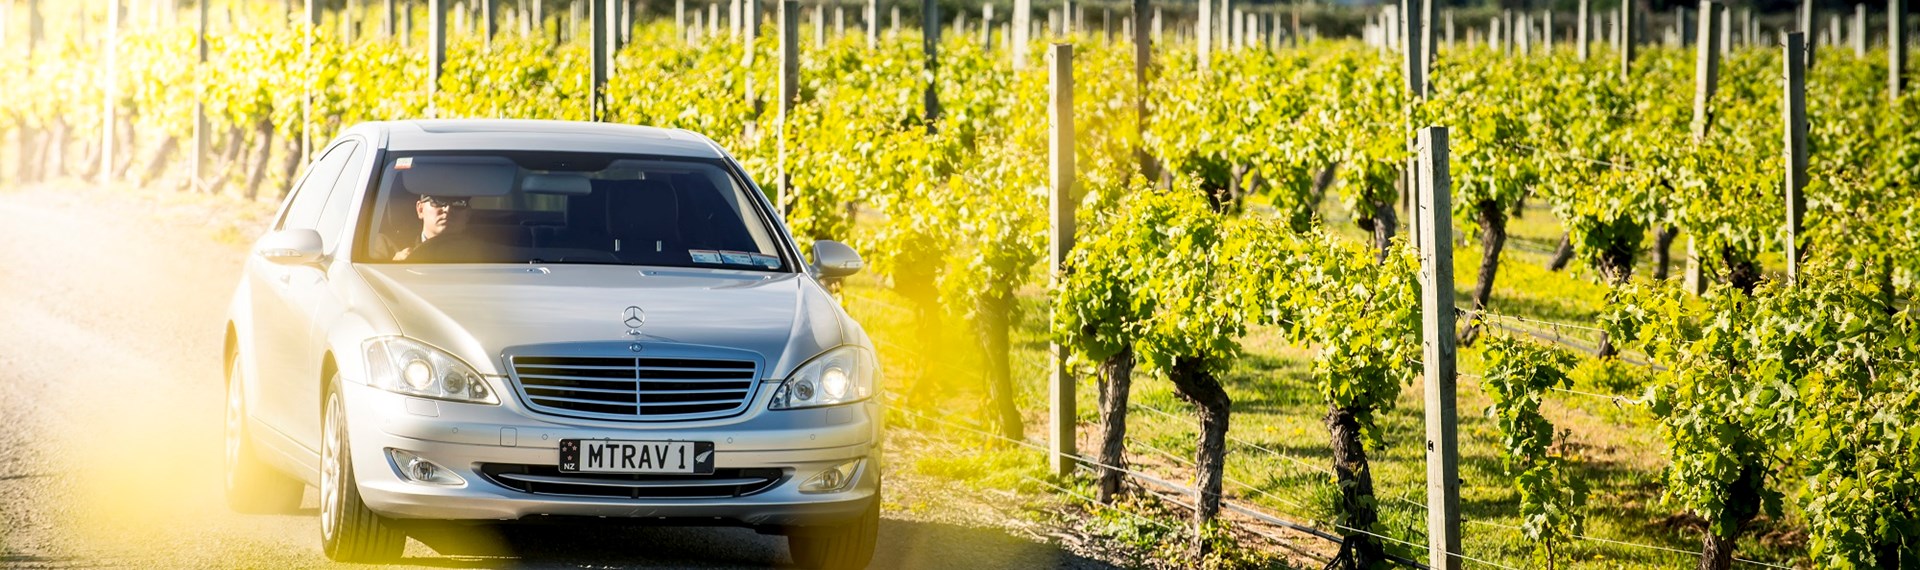 Silver car drives alongside a vineyard with hills in the background as part of a private wine tour in Marlborough near Blenheim, at the top of New Zealand's South Island